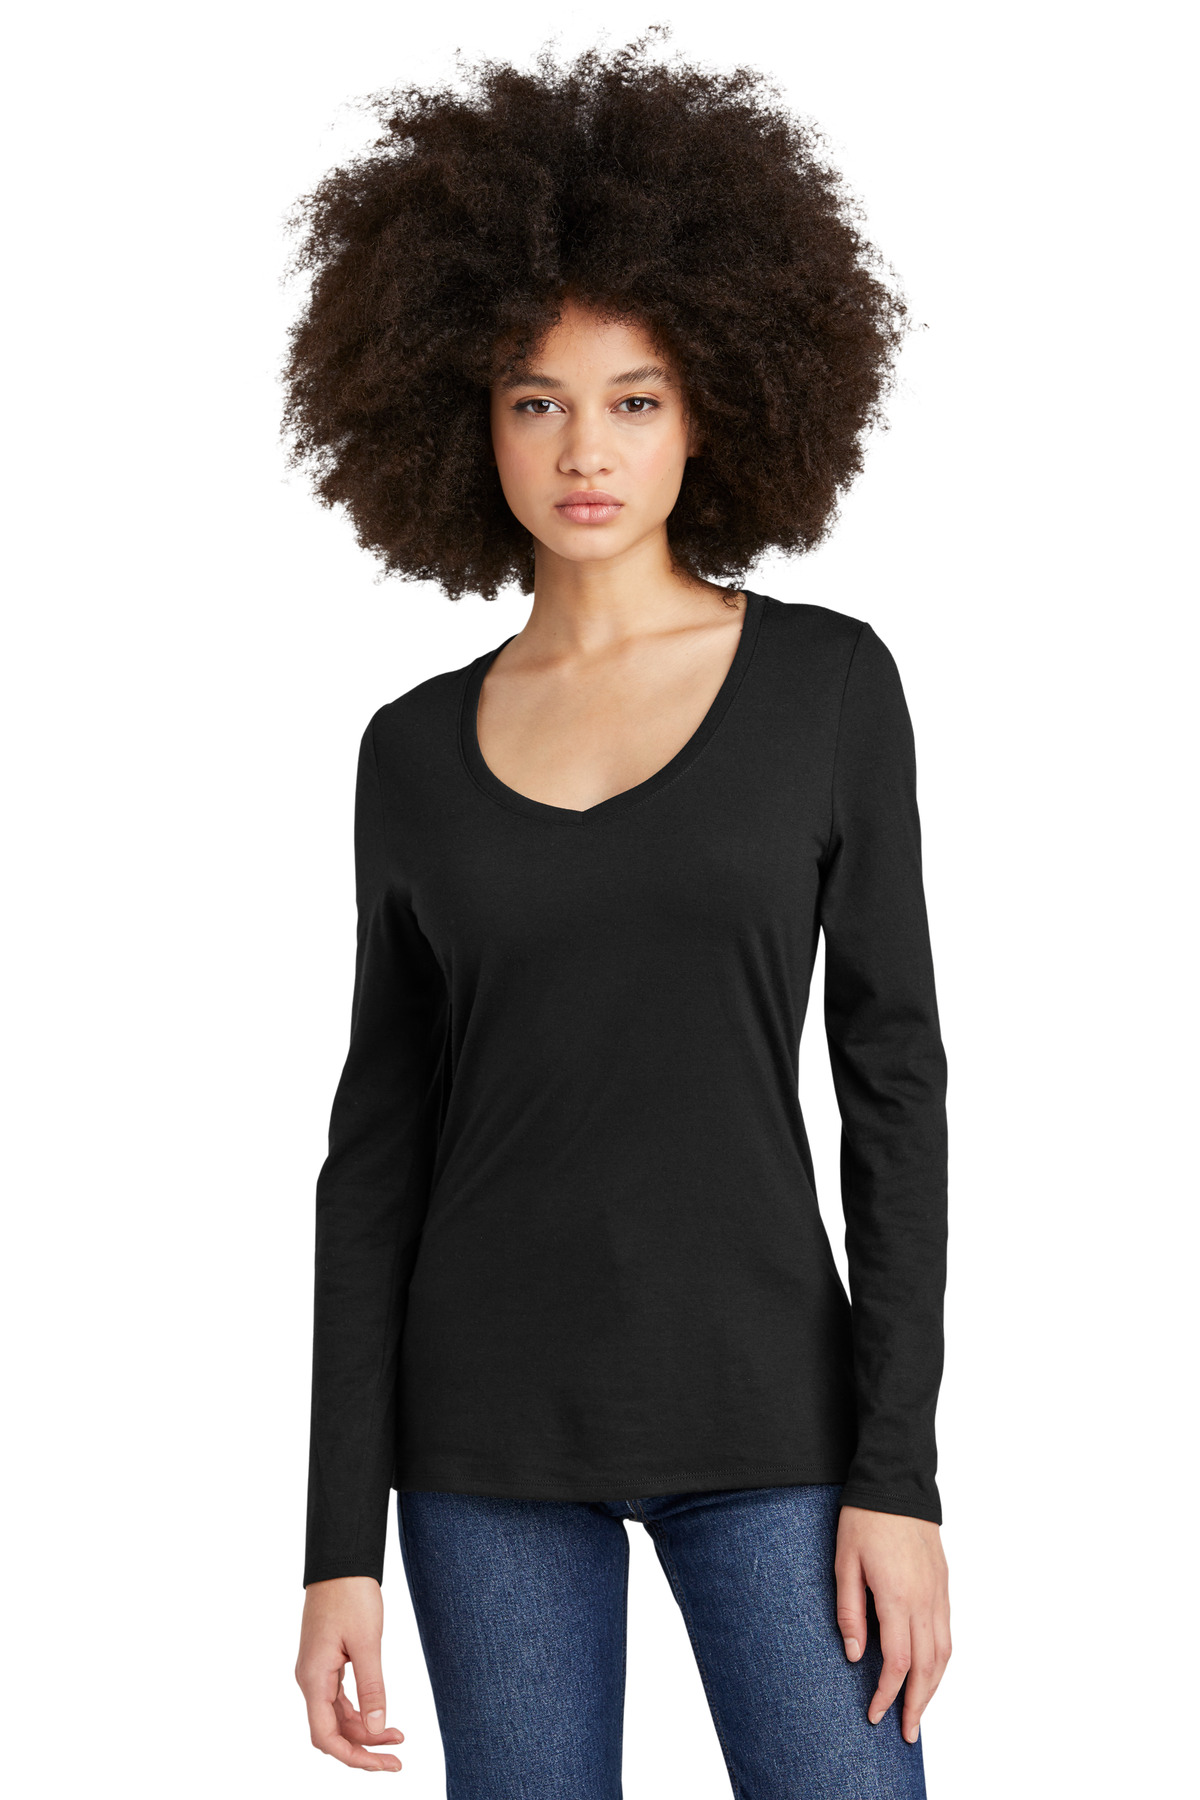 District® DT135 - Women's Perfect Tri® Long Sleeve V-Neck Tee